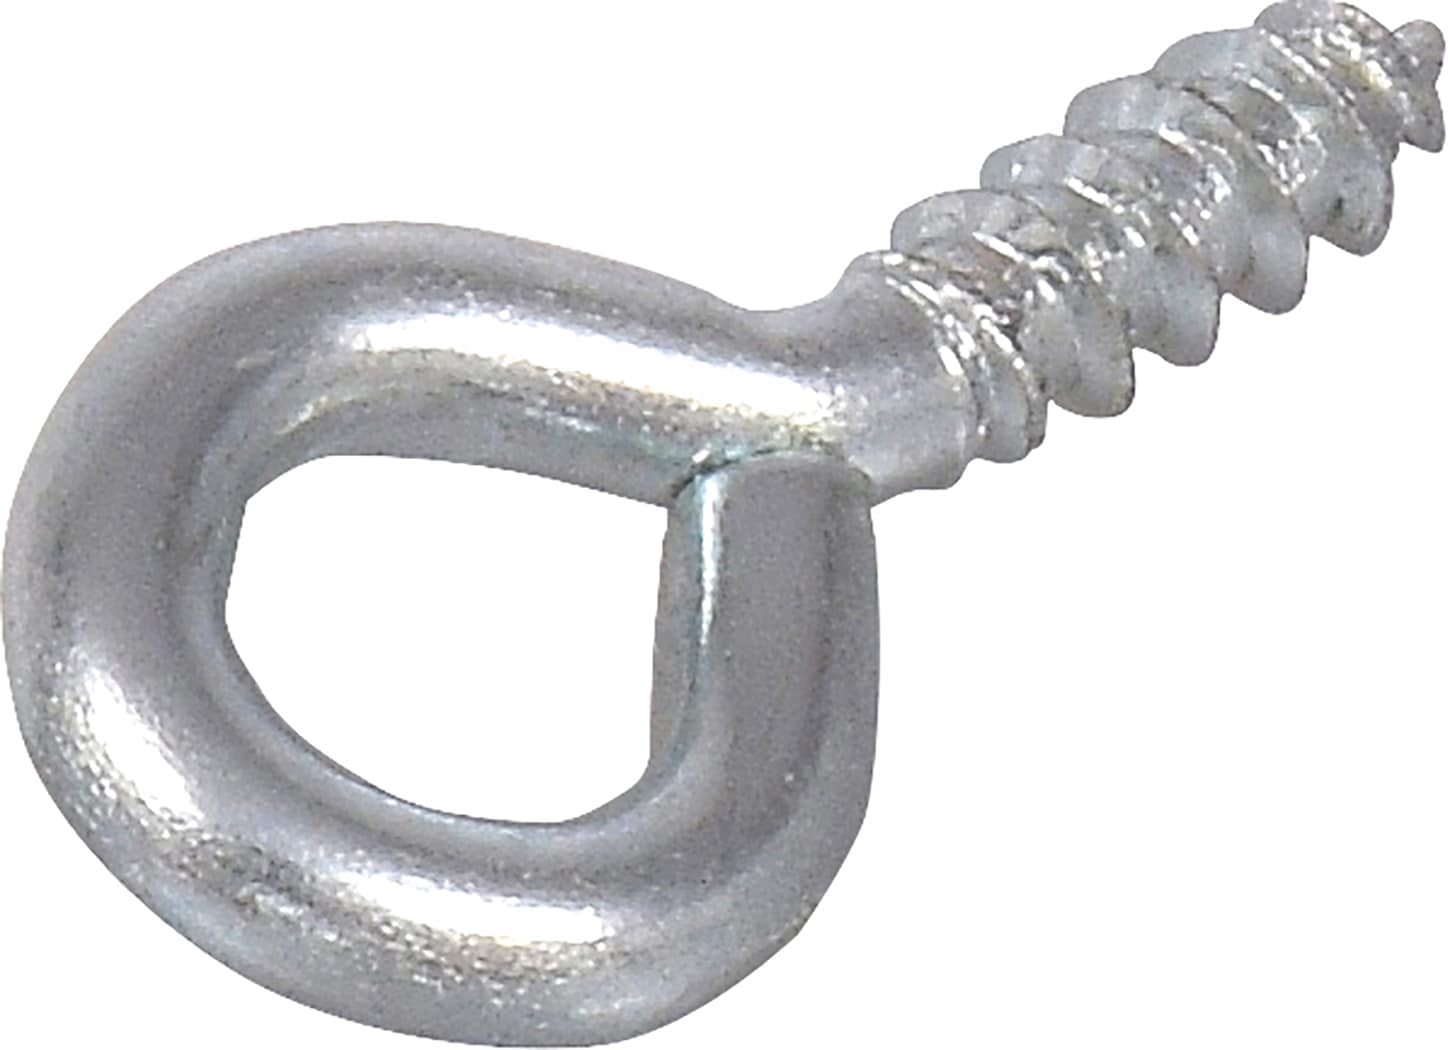 Anchor Wire Zinc Plated Hooks - 16 pack